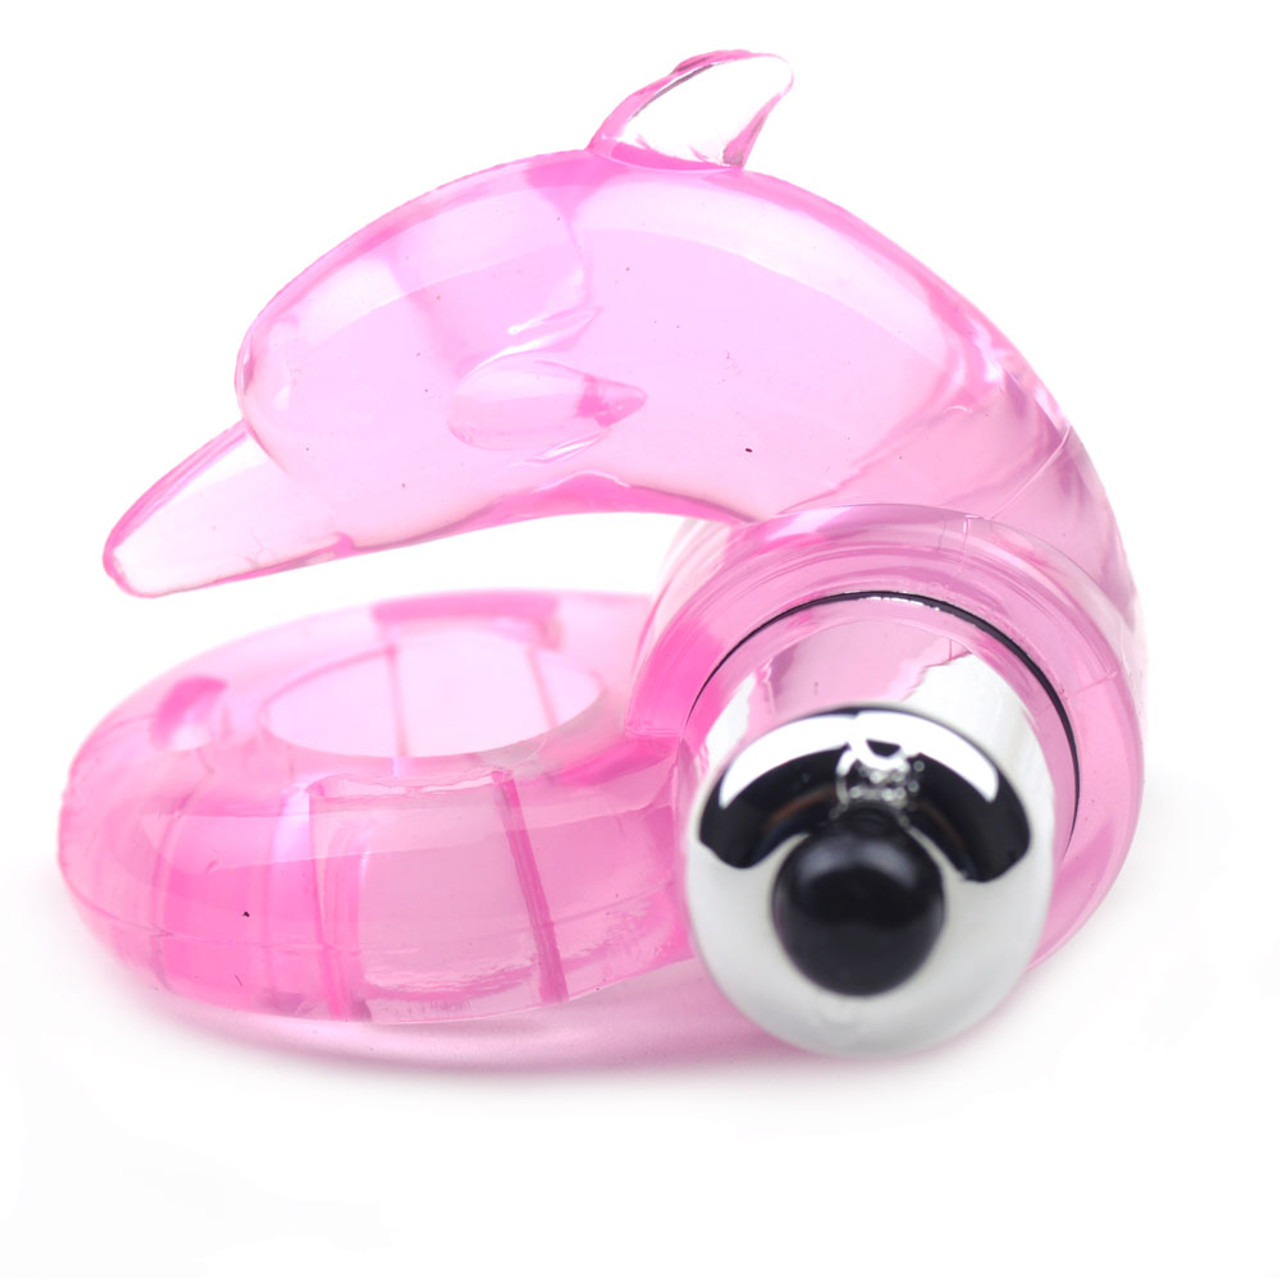 Beaded Silicone Vibrating Cock Ring - Pink - Snatcher